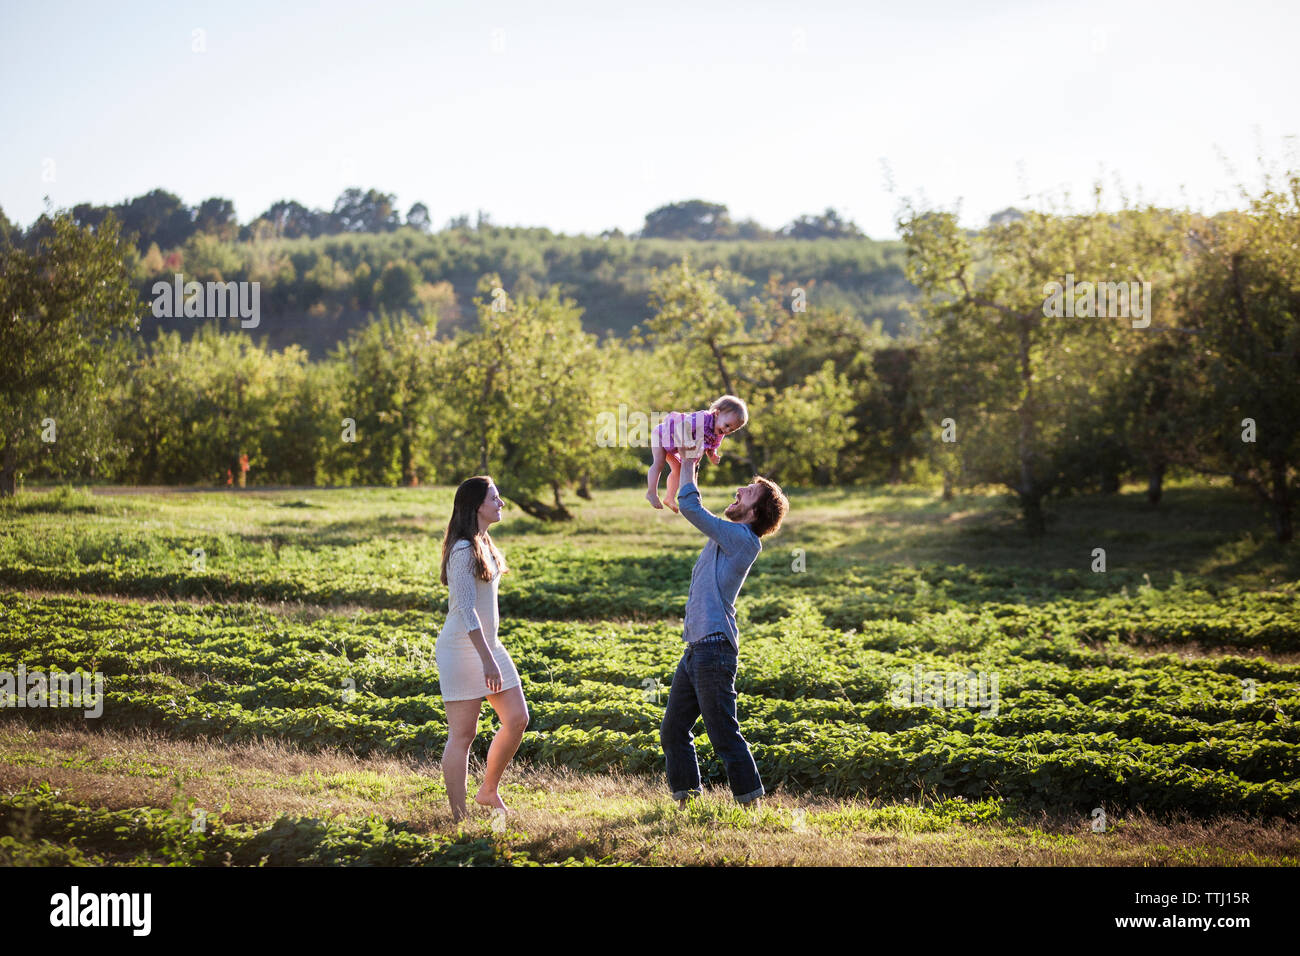 Man lifting daughter while standing with wife on field Stock Photo